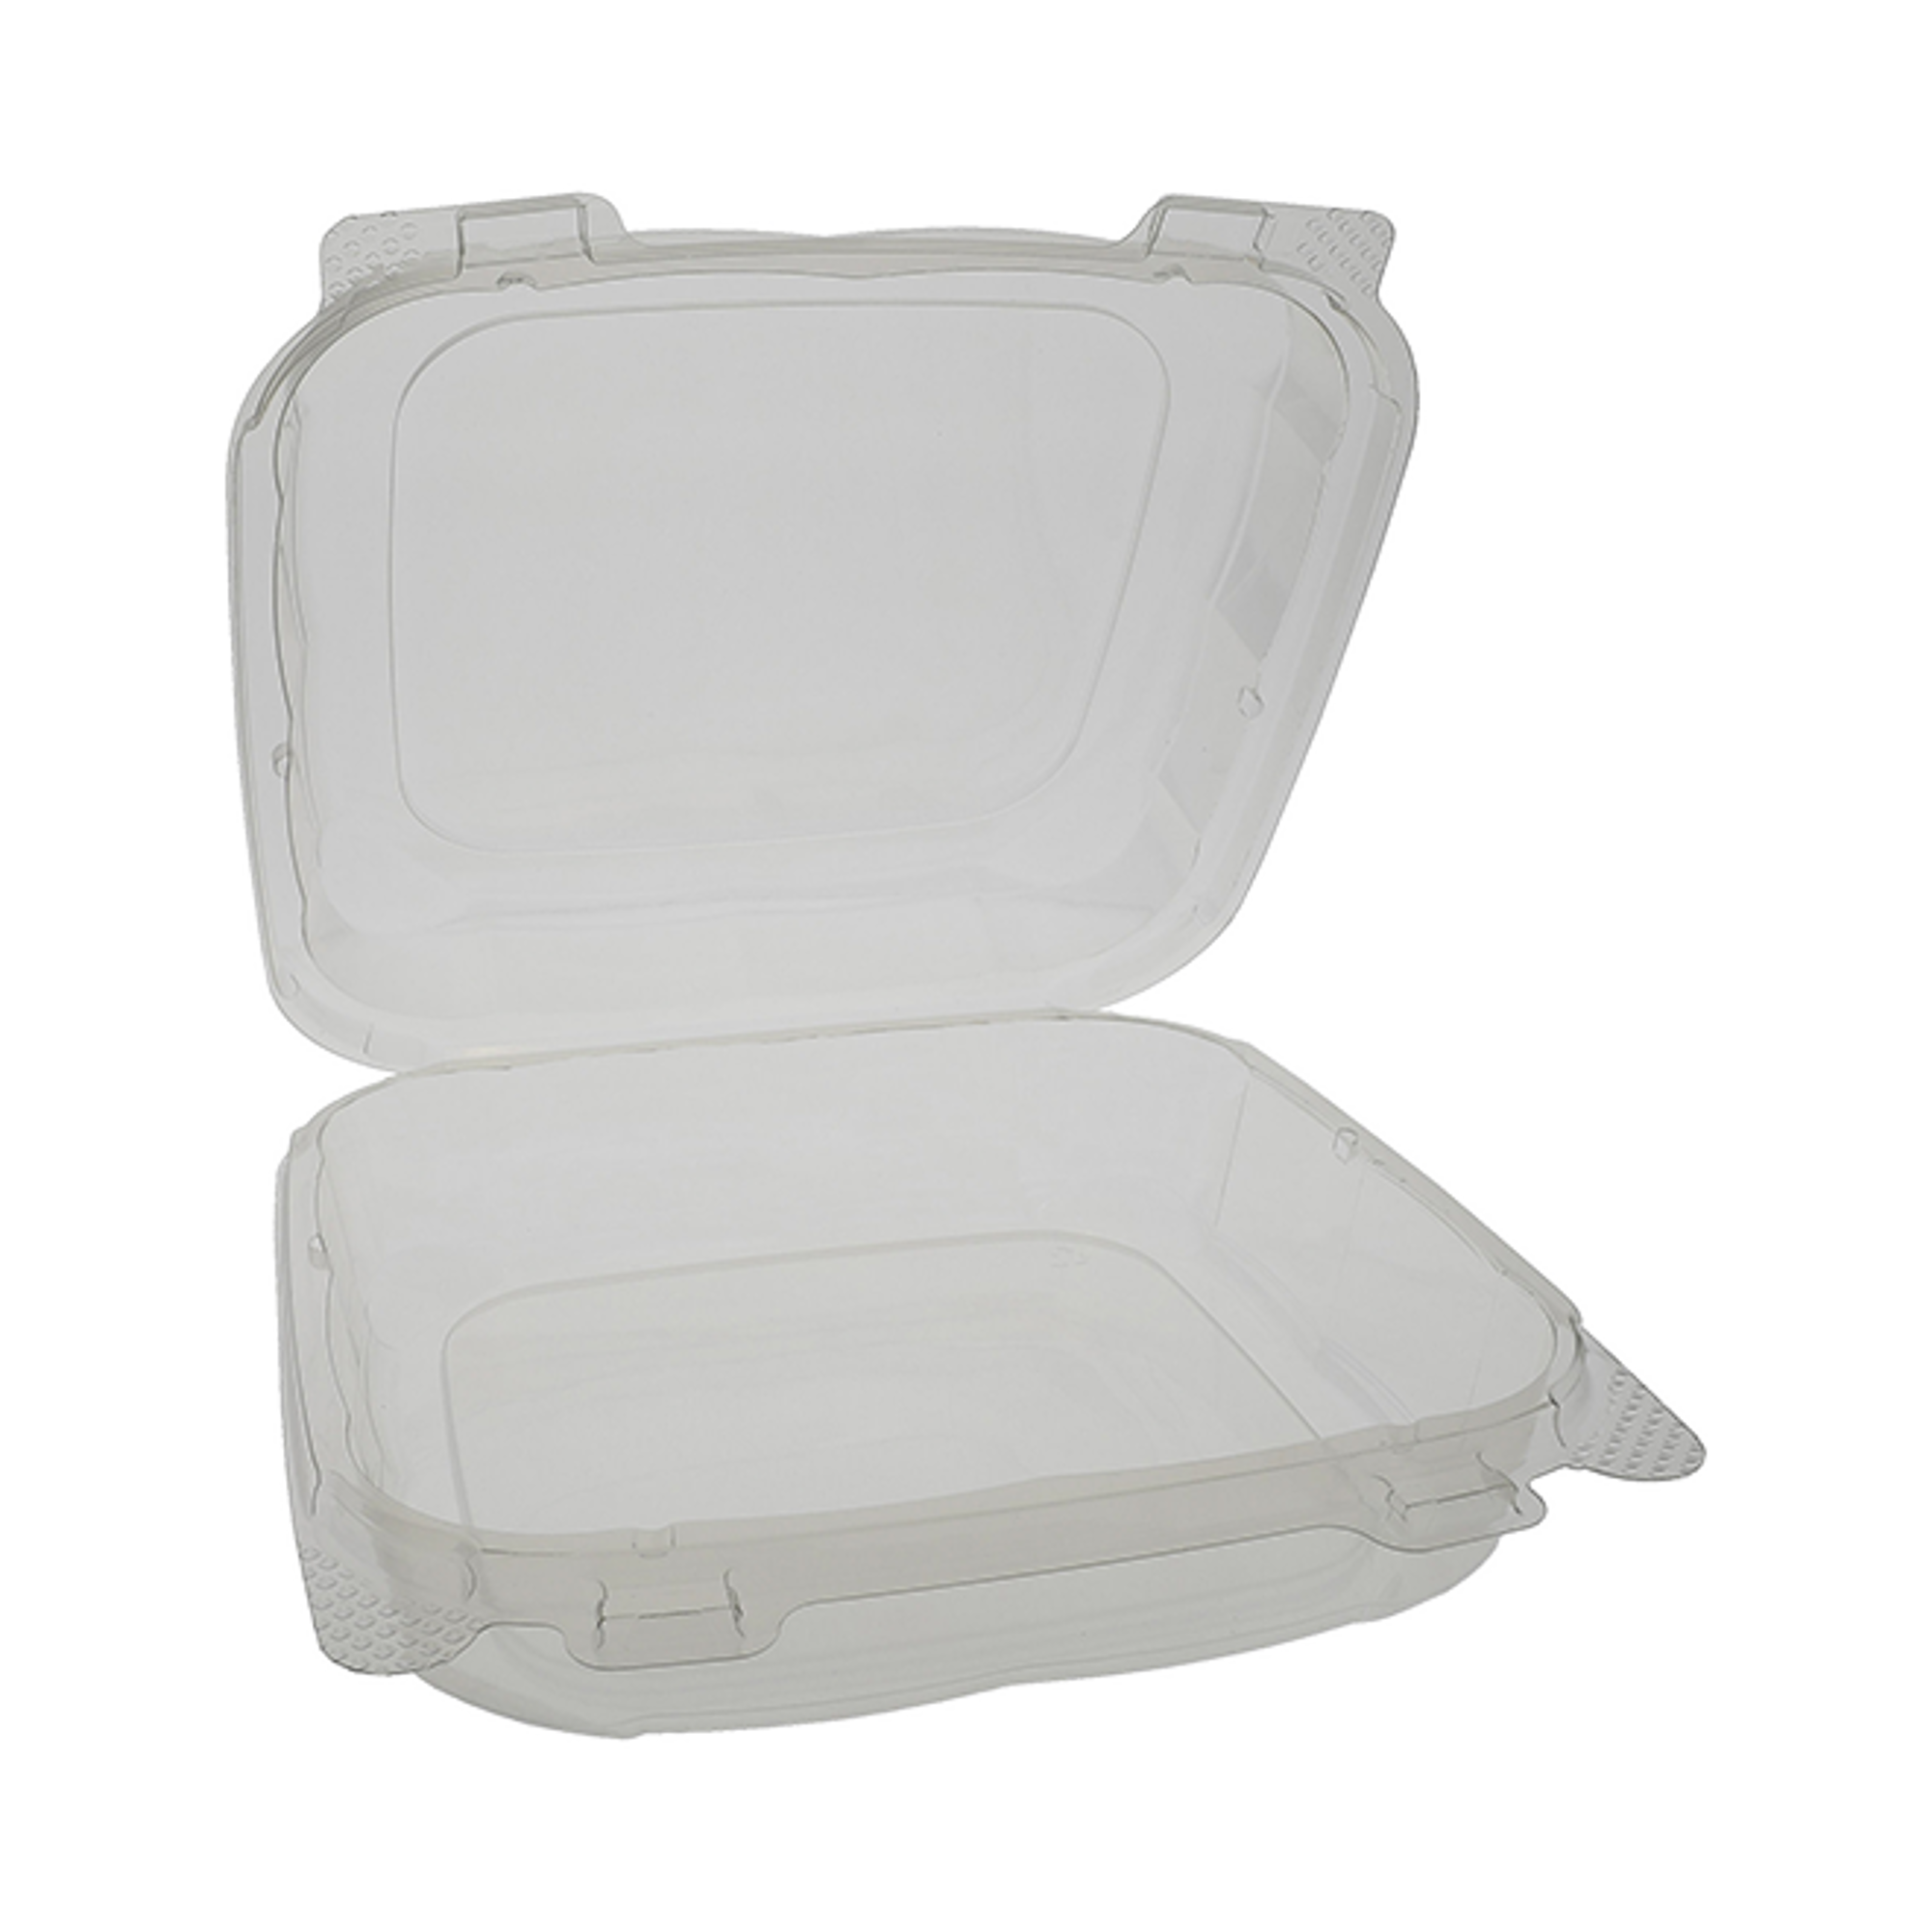 5 x 5 x 3 Recycled Plastic Hinged Lid 1 Compartment Takeout Container,  Clear, 375 ct.